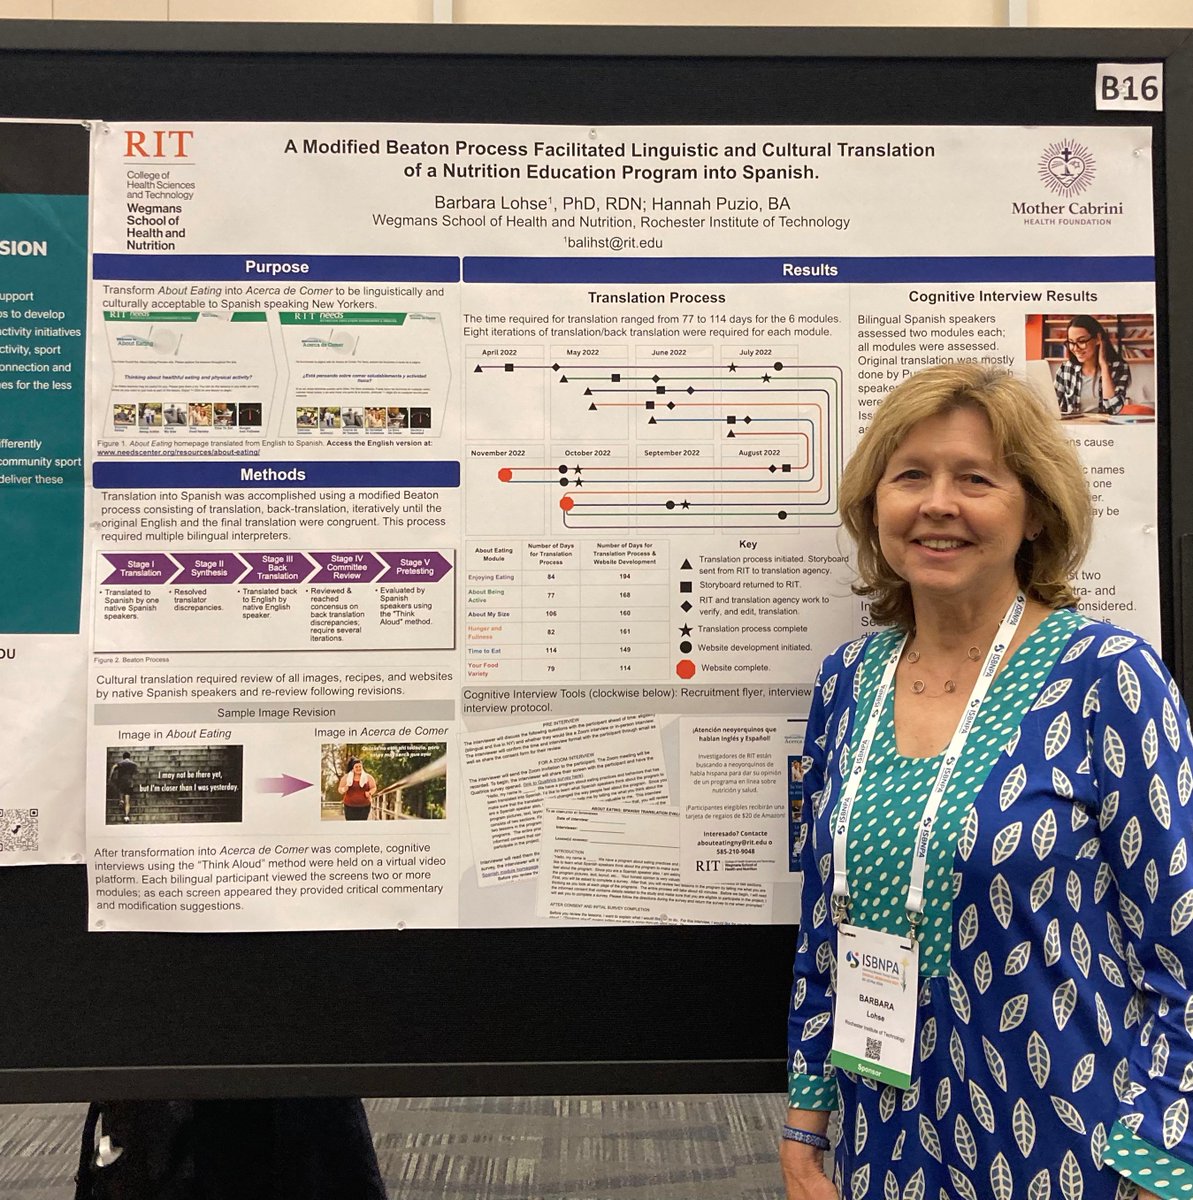 The Wegmans School was well-represented at the International Society of Behavioral Nutrition and Physical Activity conference - as a conference sponsor, along with faculty showcasing their work through both oral and poster presentations. @ISBNPA